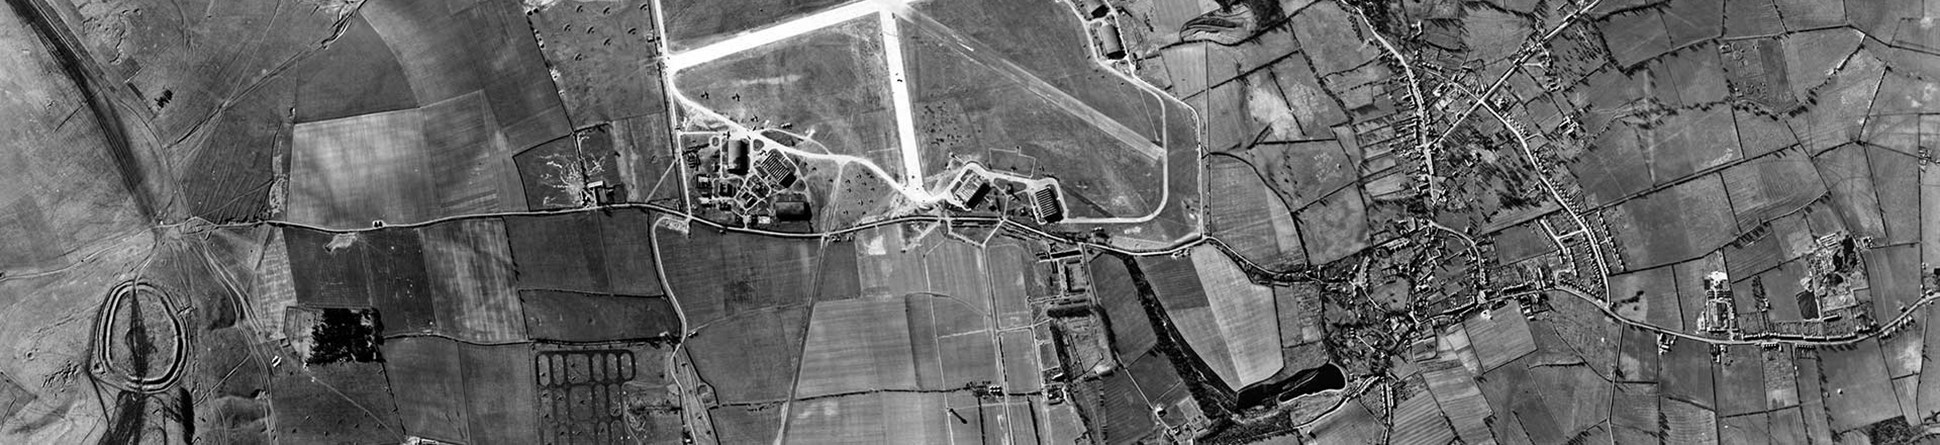 Black and white vertical aerial photograph showing an extensive landscape with fields, roads, houses and an airfield.